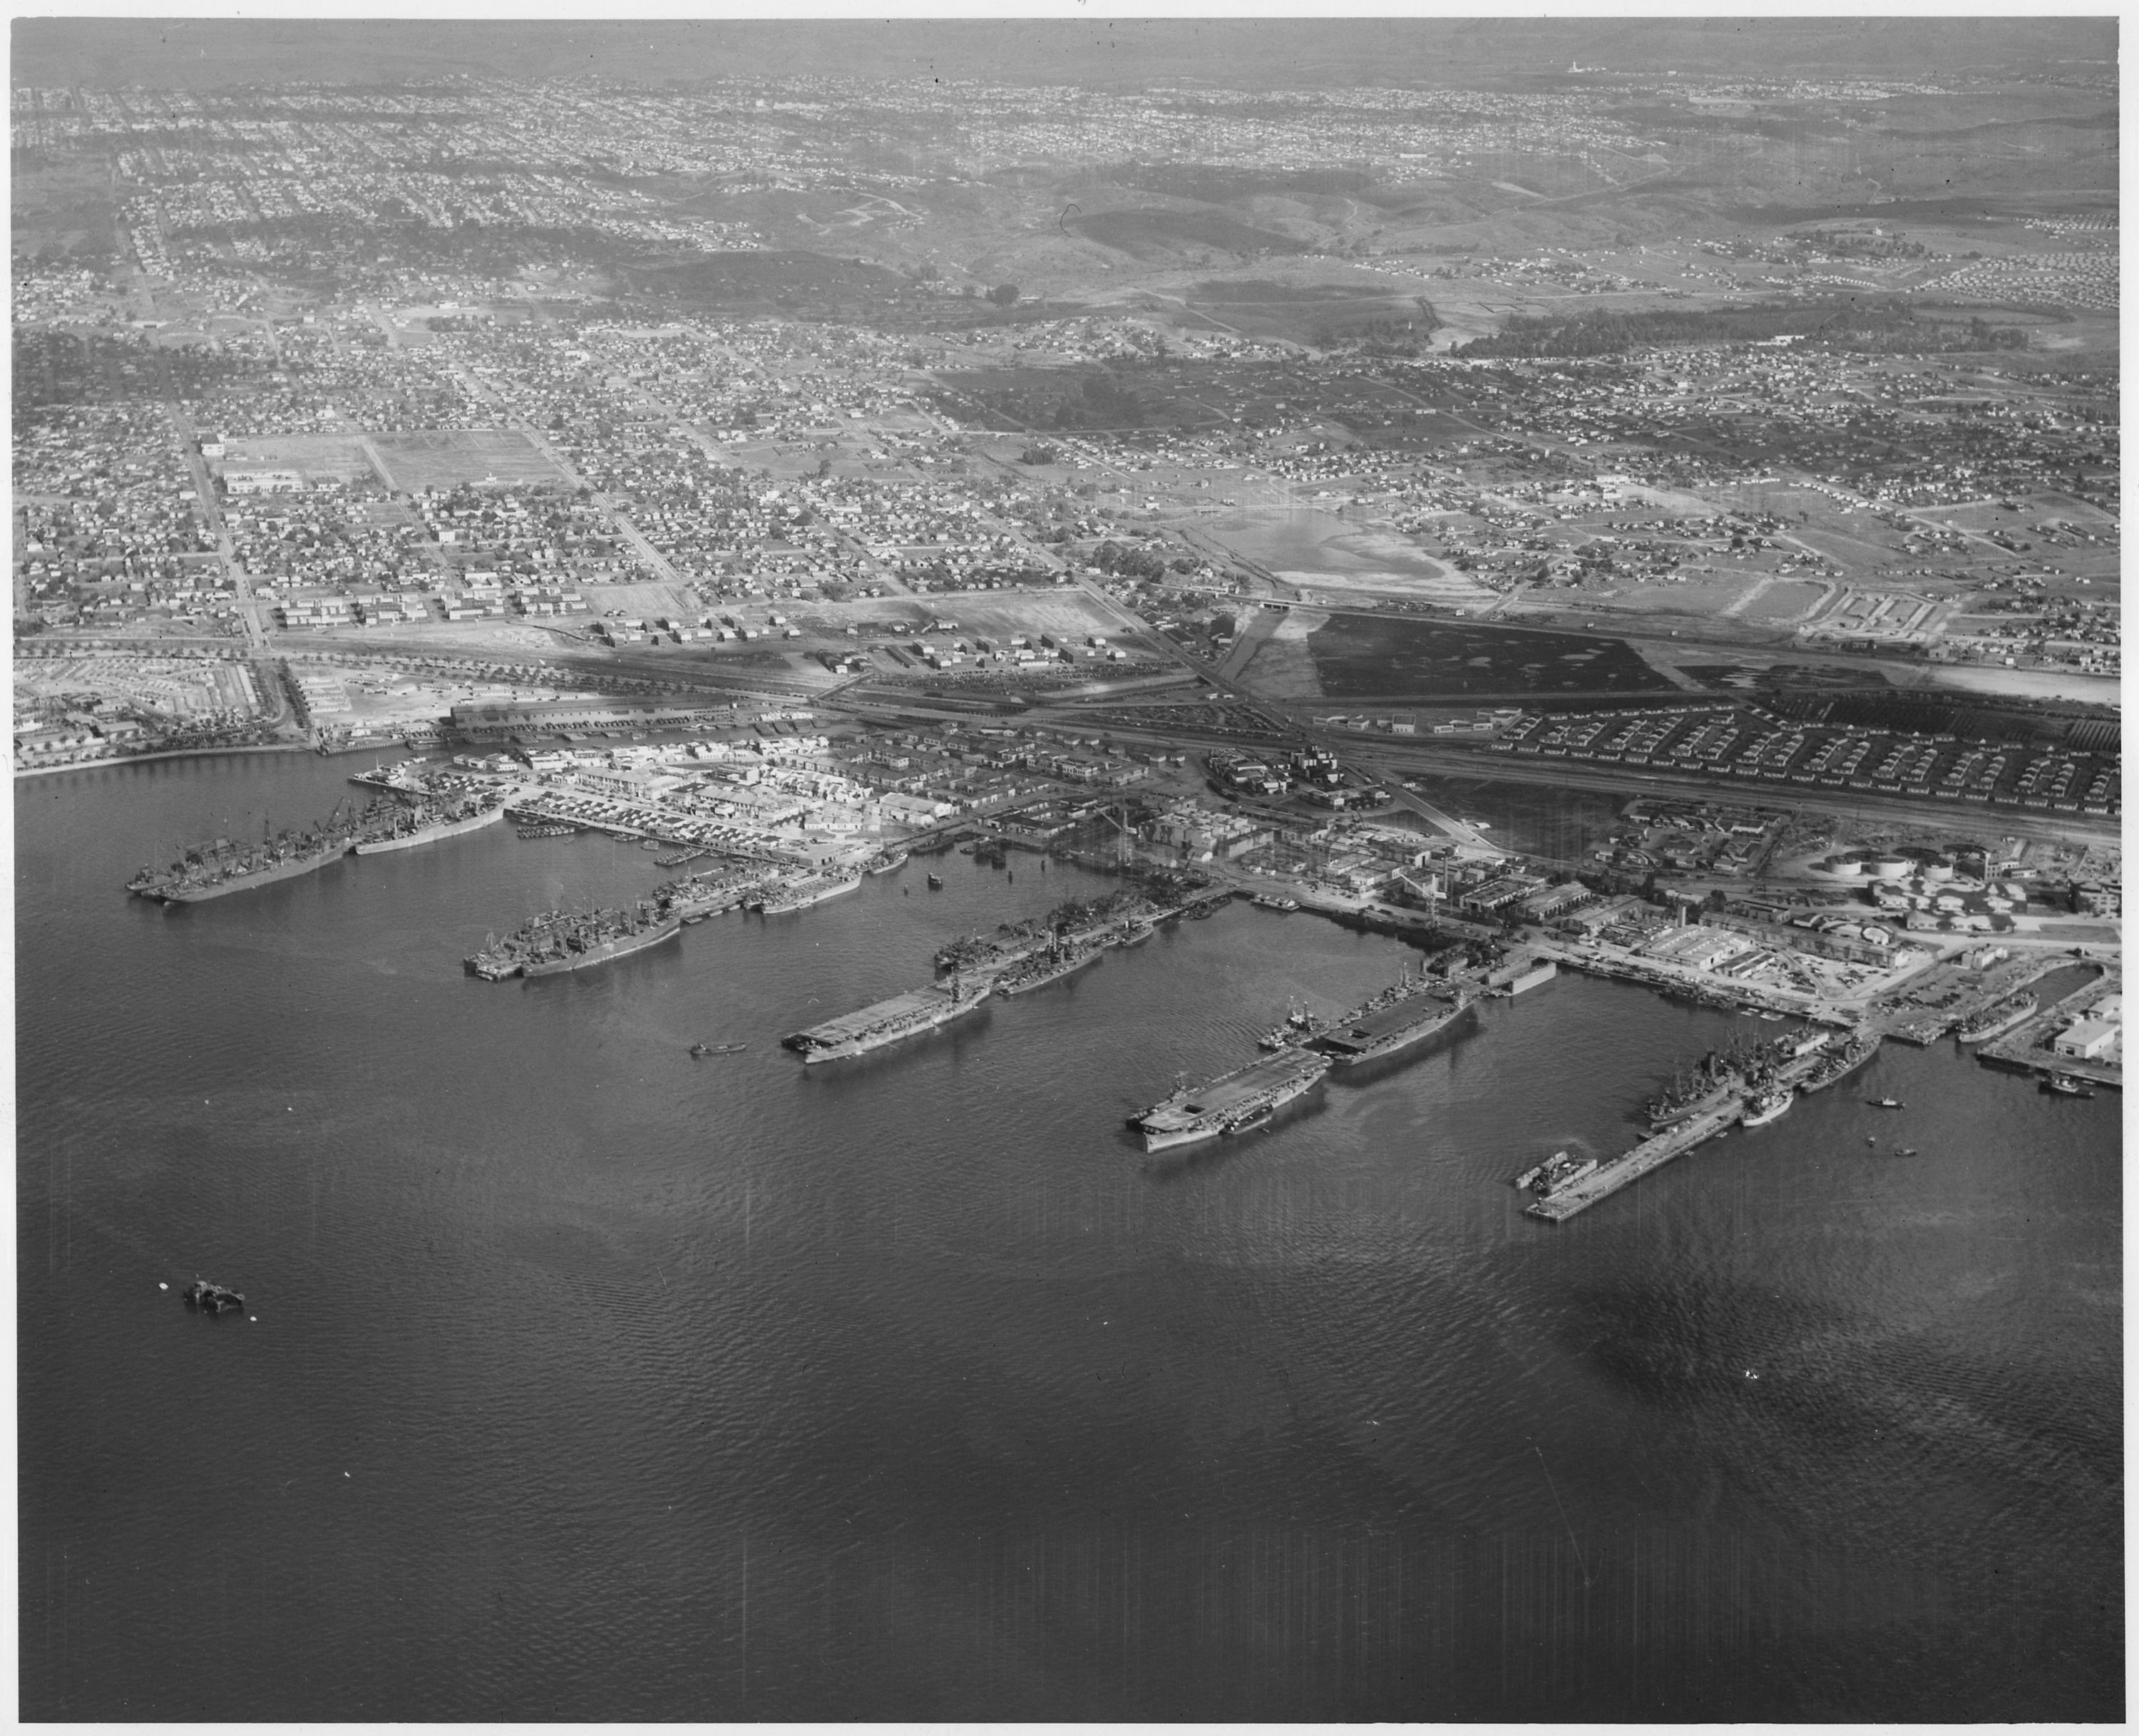 Aerial_photograph_of_aircraft_carriers_and_other_large_ships_docked_at_the_U.S._Naval_Repair_Base,_San_Diego..._-_NARA_-_295639.jpg